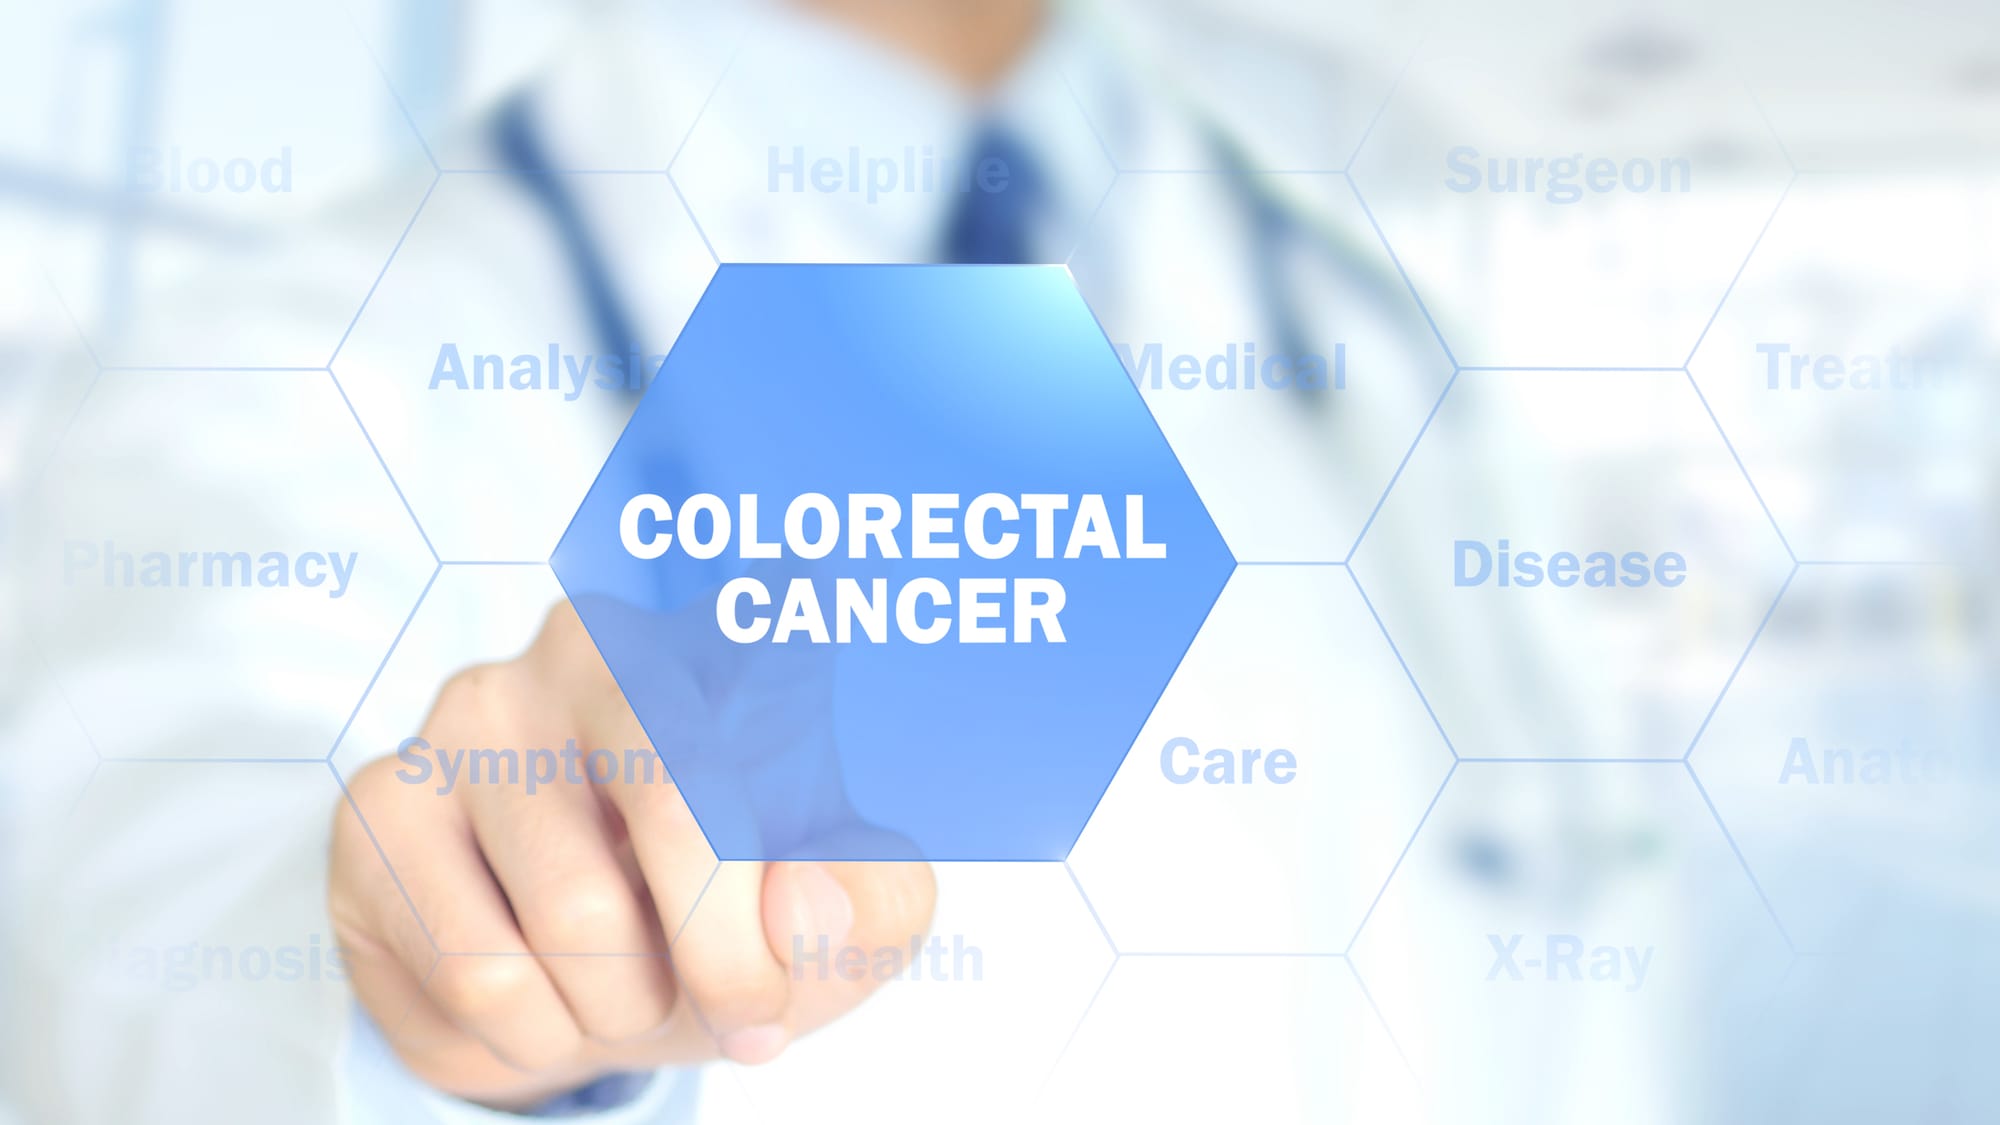 Advances in screening for colon cancer